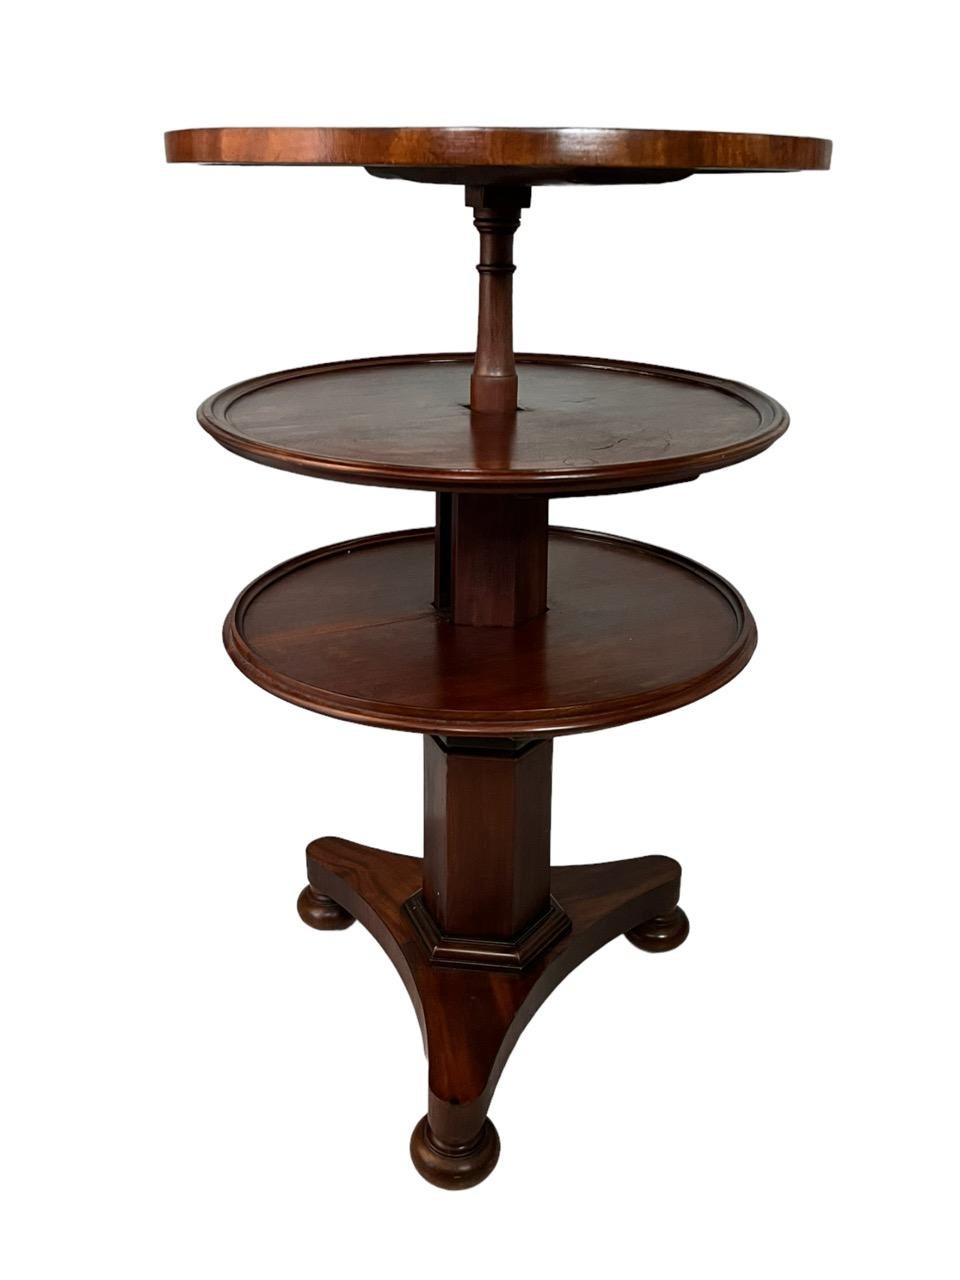 Neoclassical 18th Century English Mahogany Expandable Round Three Tier Dumbwaiter Table For Sale